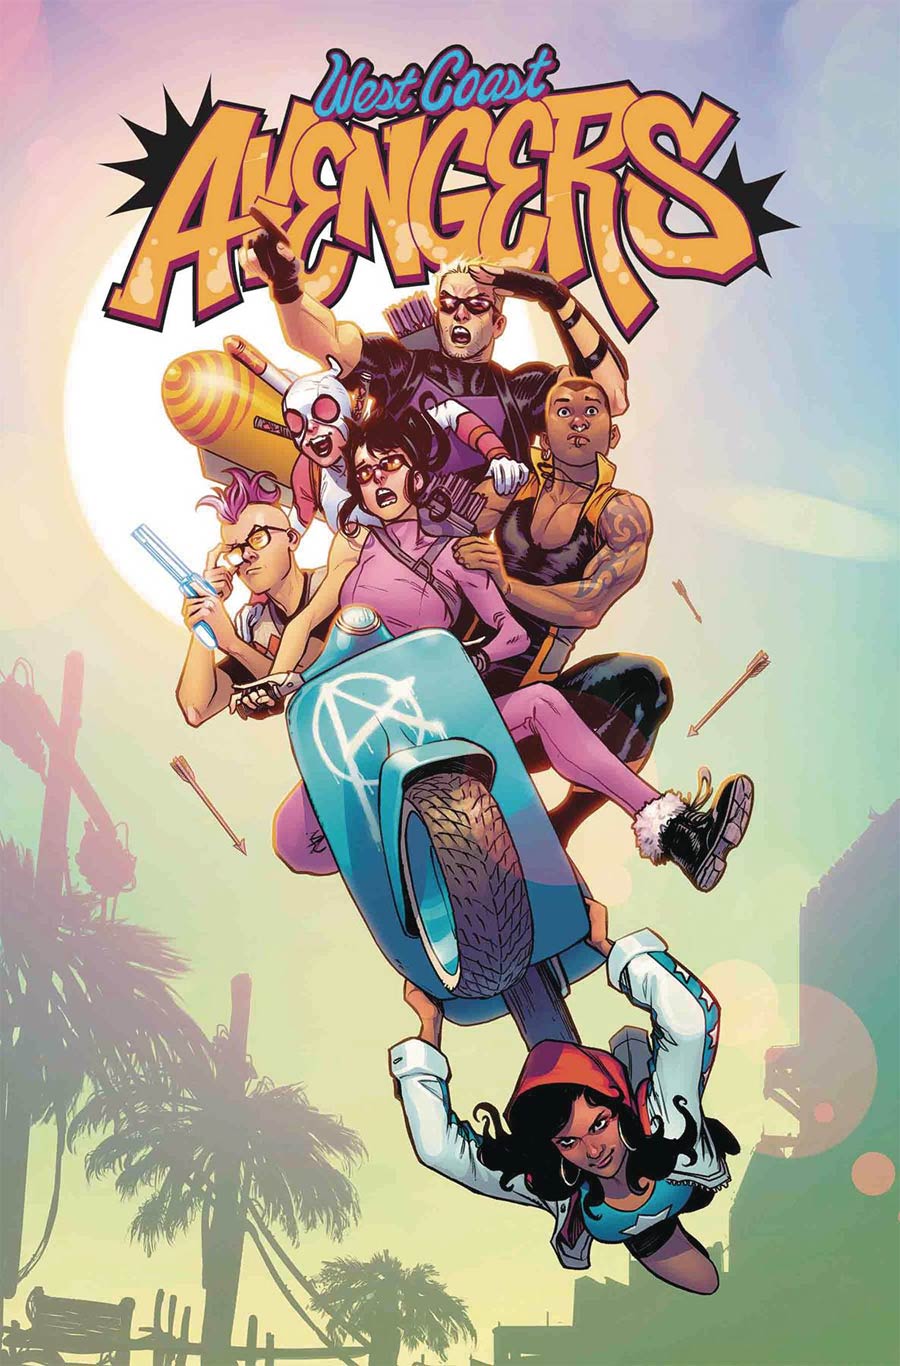 West Coast Avengers Vol 3 #1 By Stefano Caselli Poster